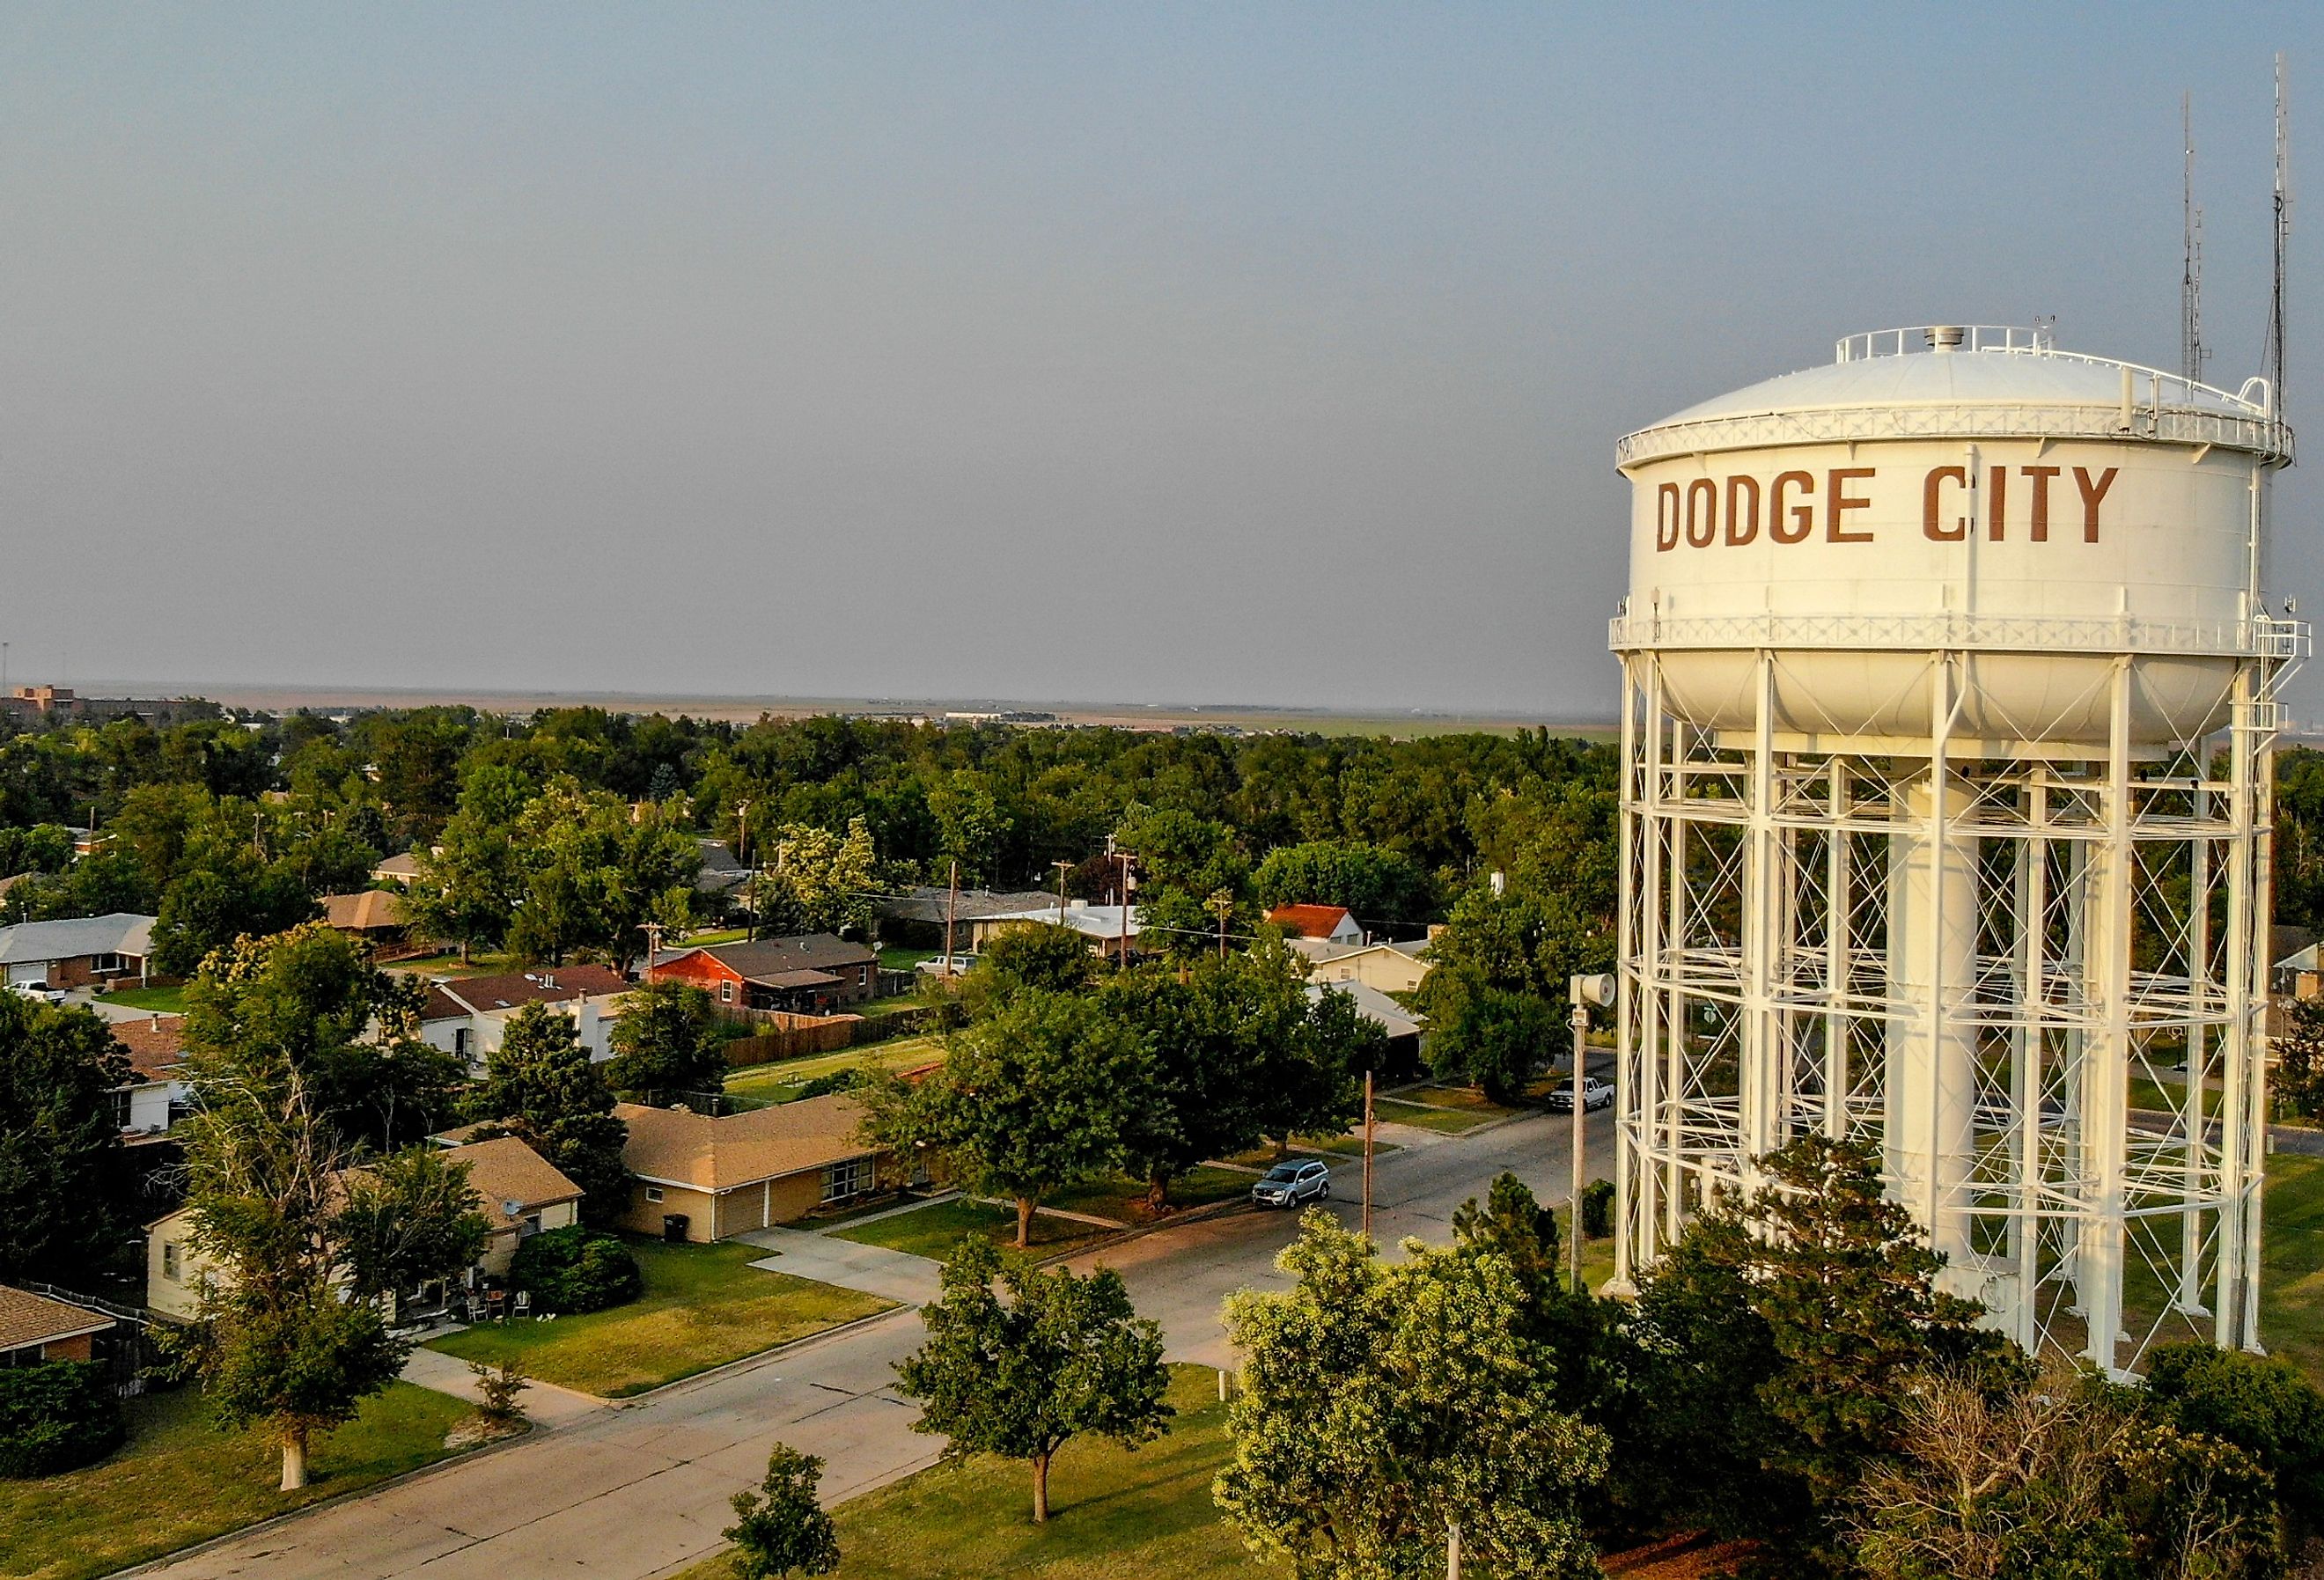 Water tower in downtown afternoon Dodge City, Kansas. Image credit Eduardo Medrano via Shutterstock